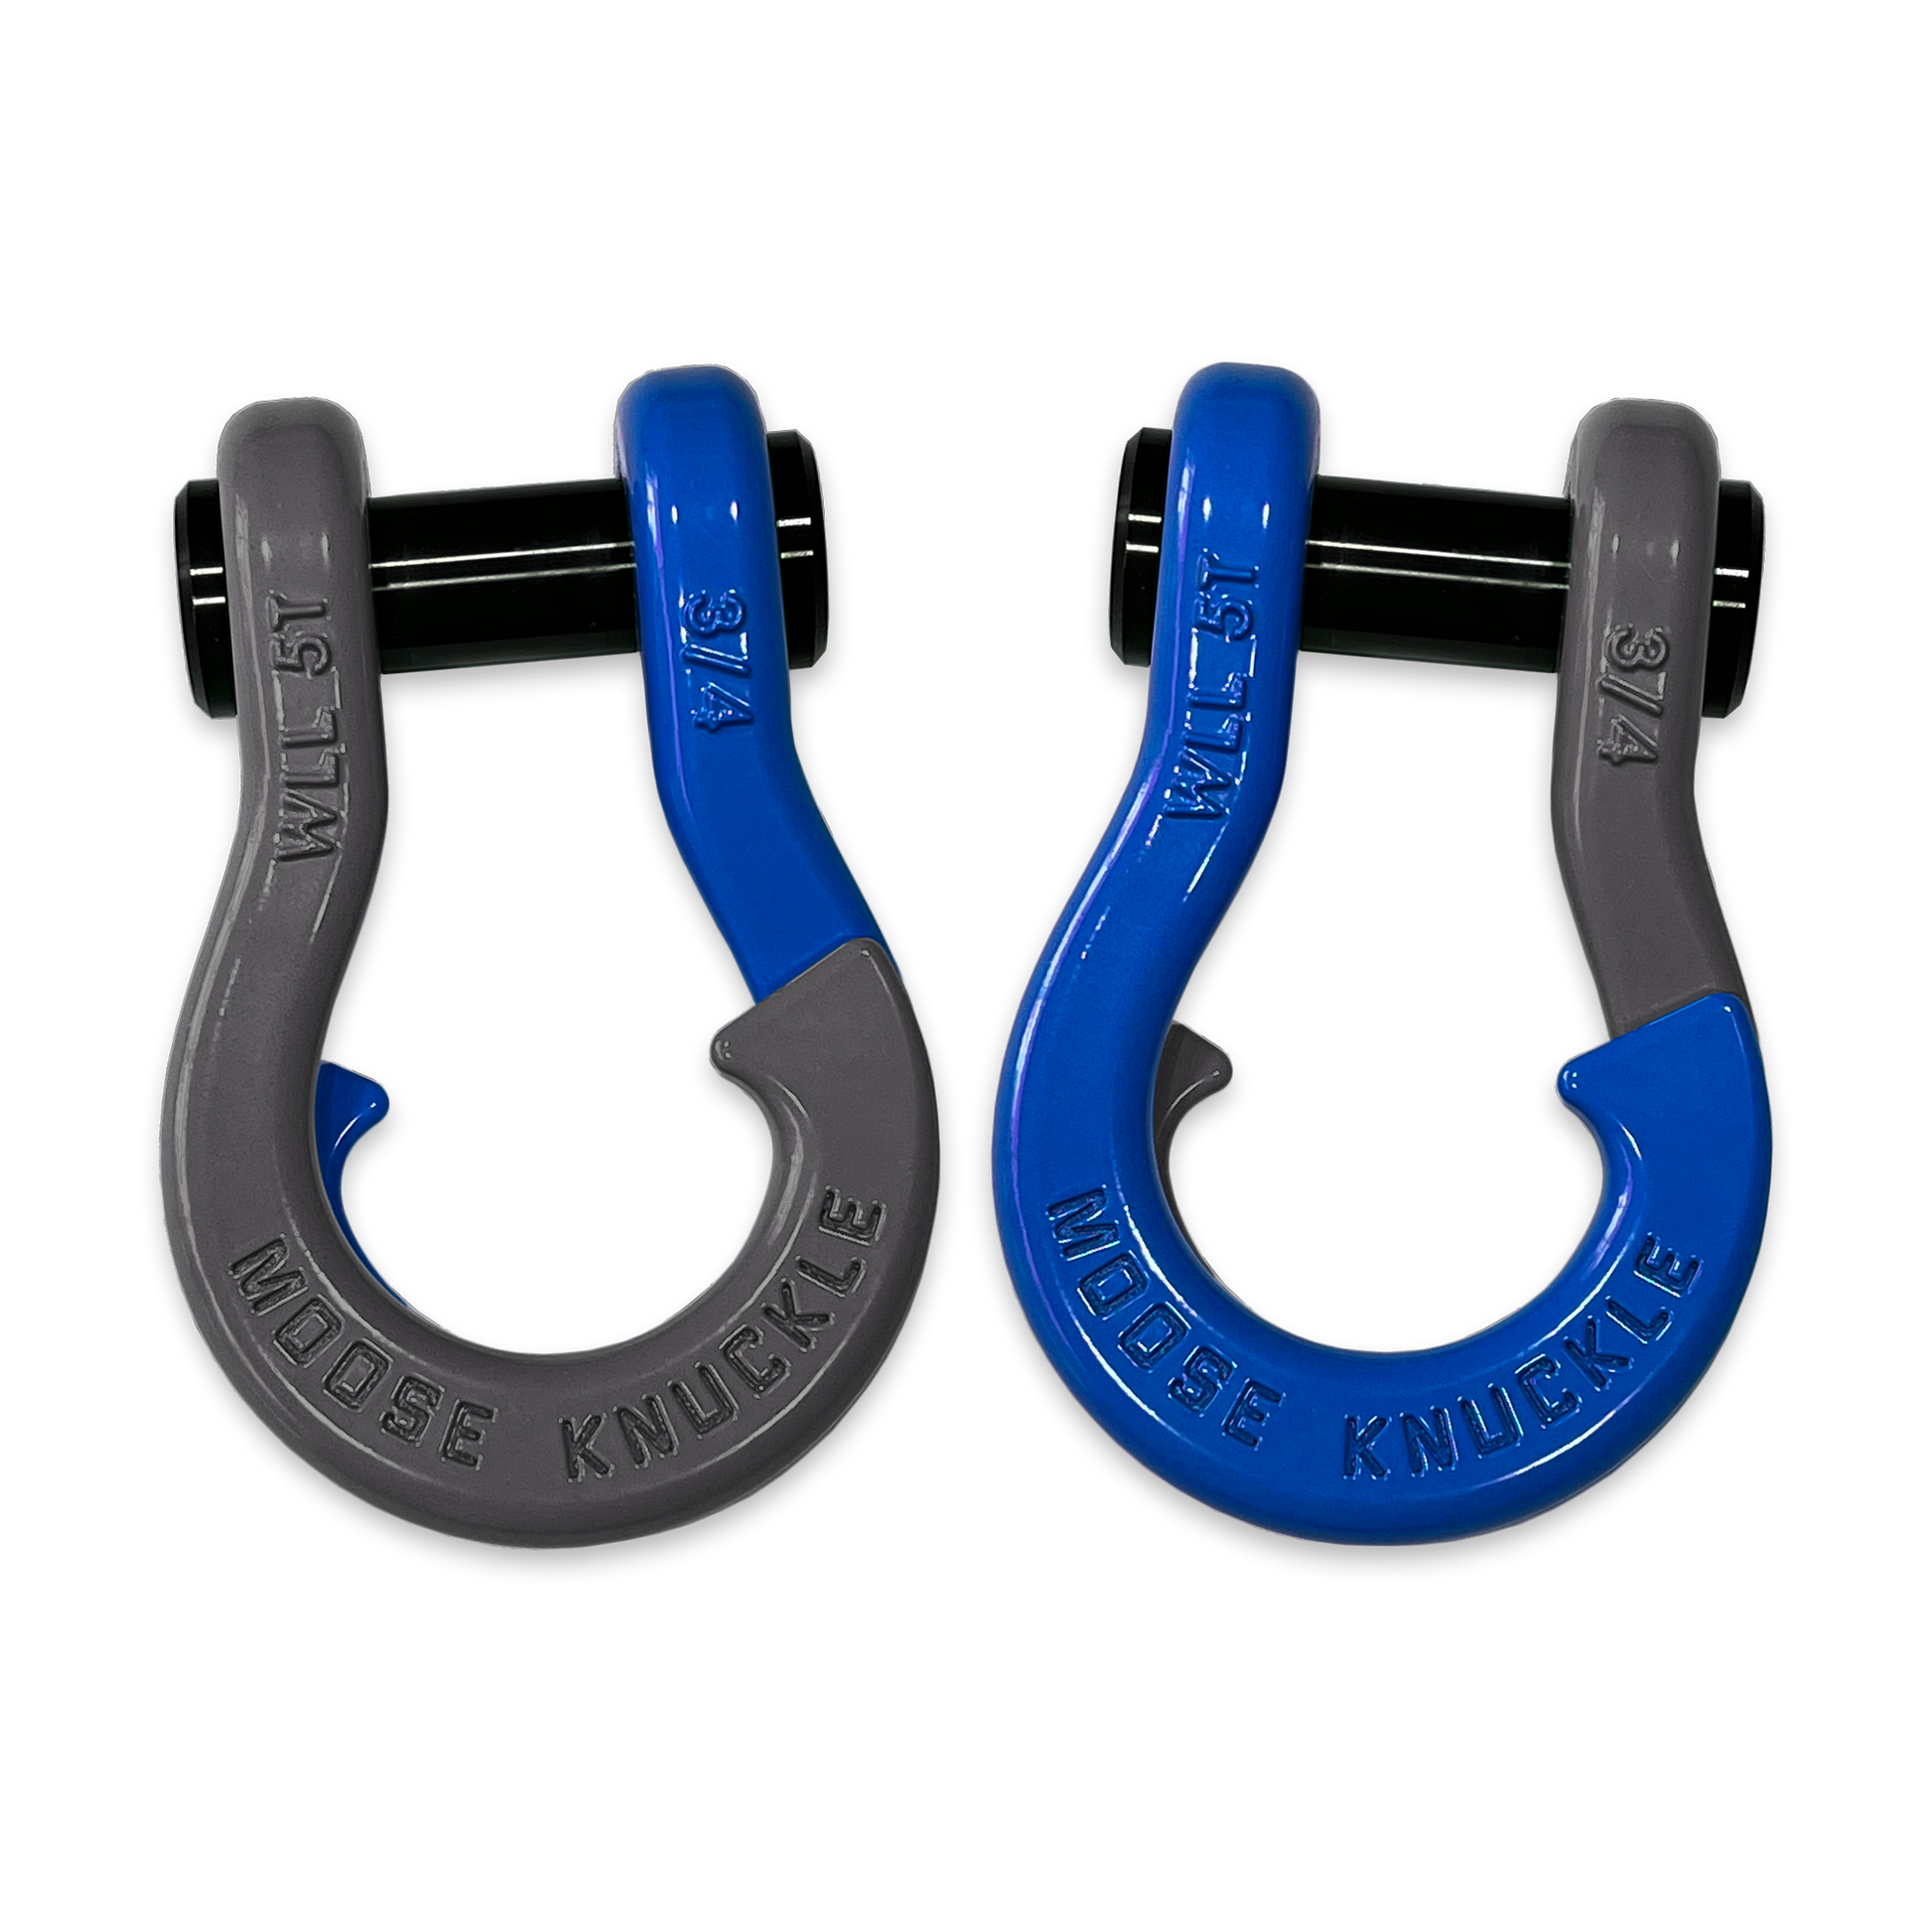 Moose Knuckle's Jowl Recovery Split Shackle 3/4 in Gun Gray and Blue Balls Combo